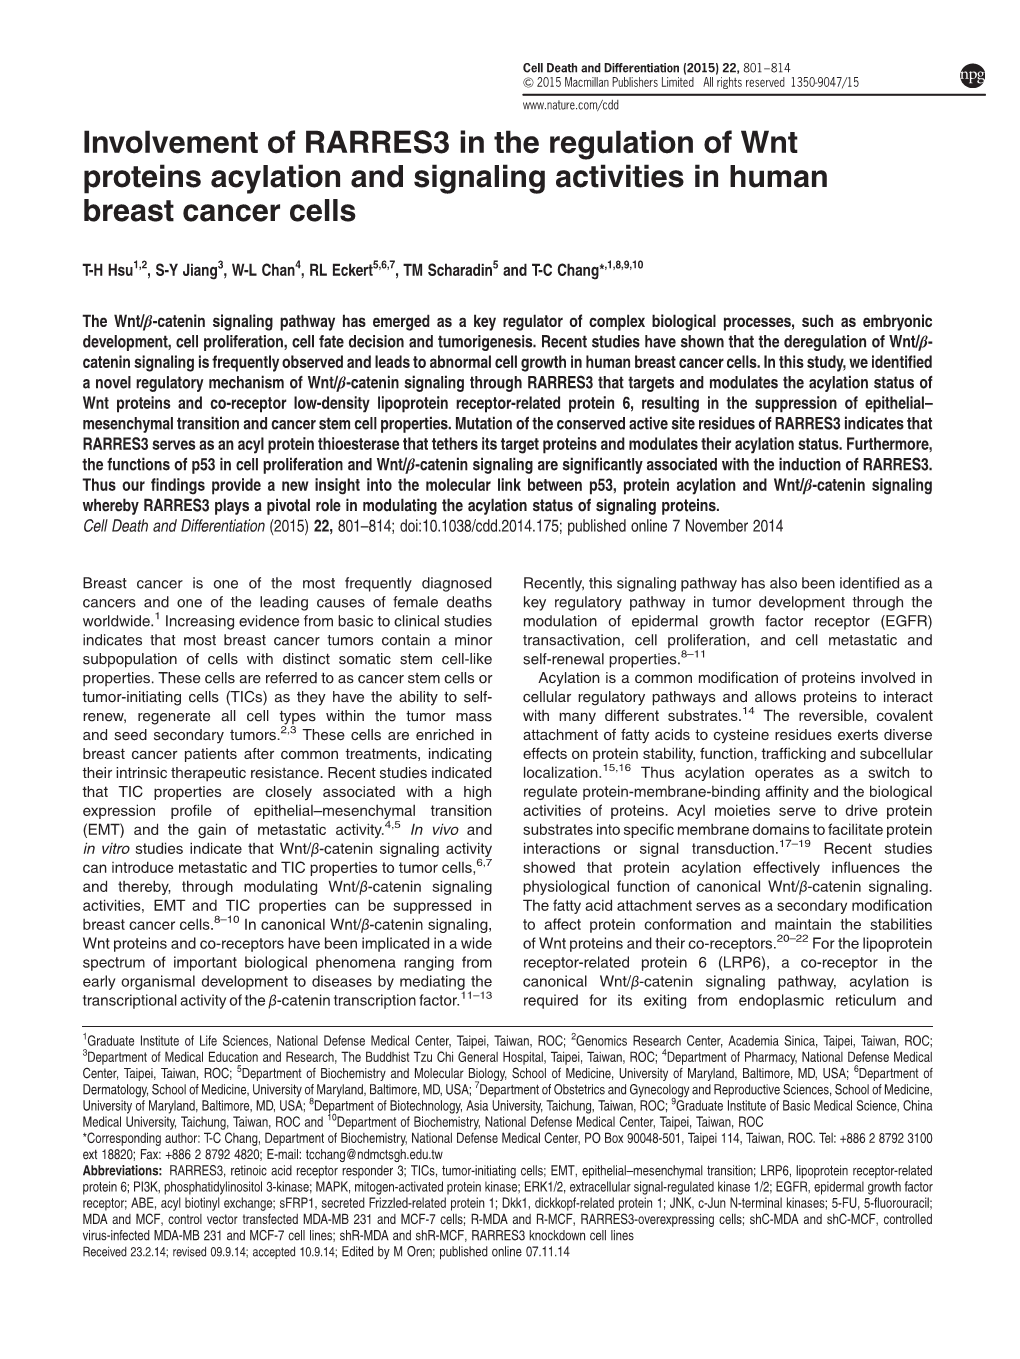 Involvement of RARRES3 in the Regulation of Wnt Proteins Acylation and Signaling Activities in Human Breast Cancer Cells